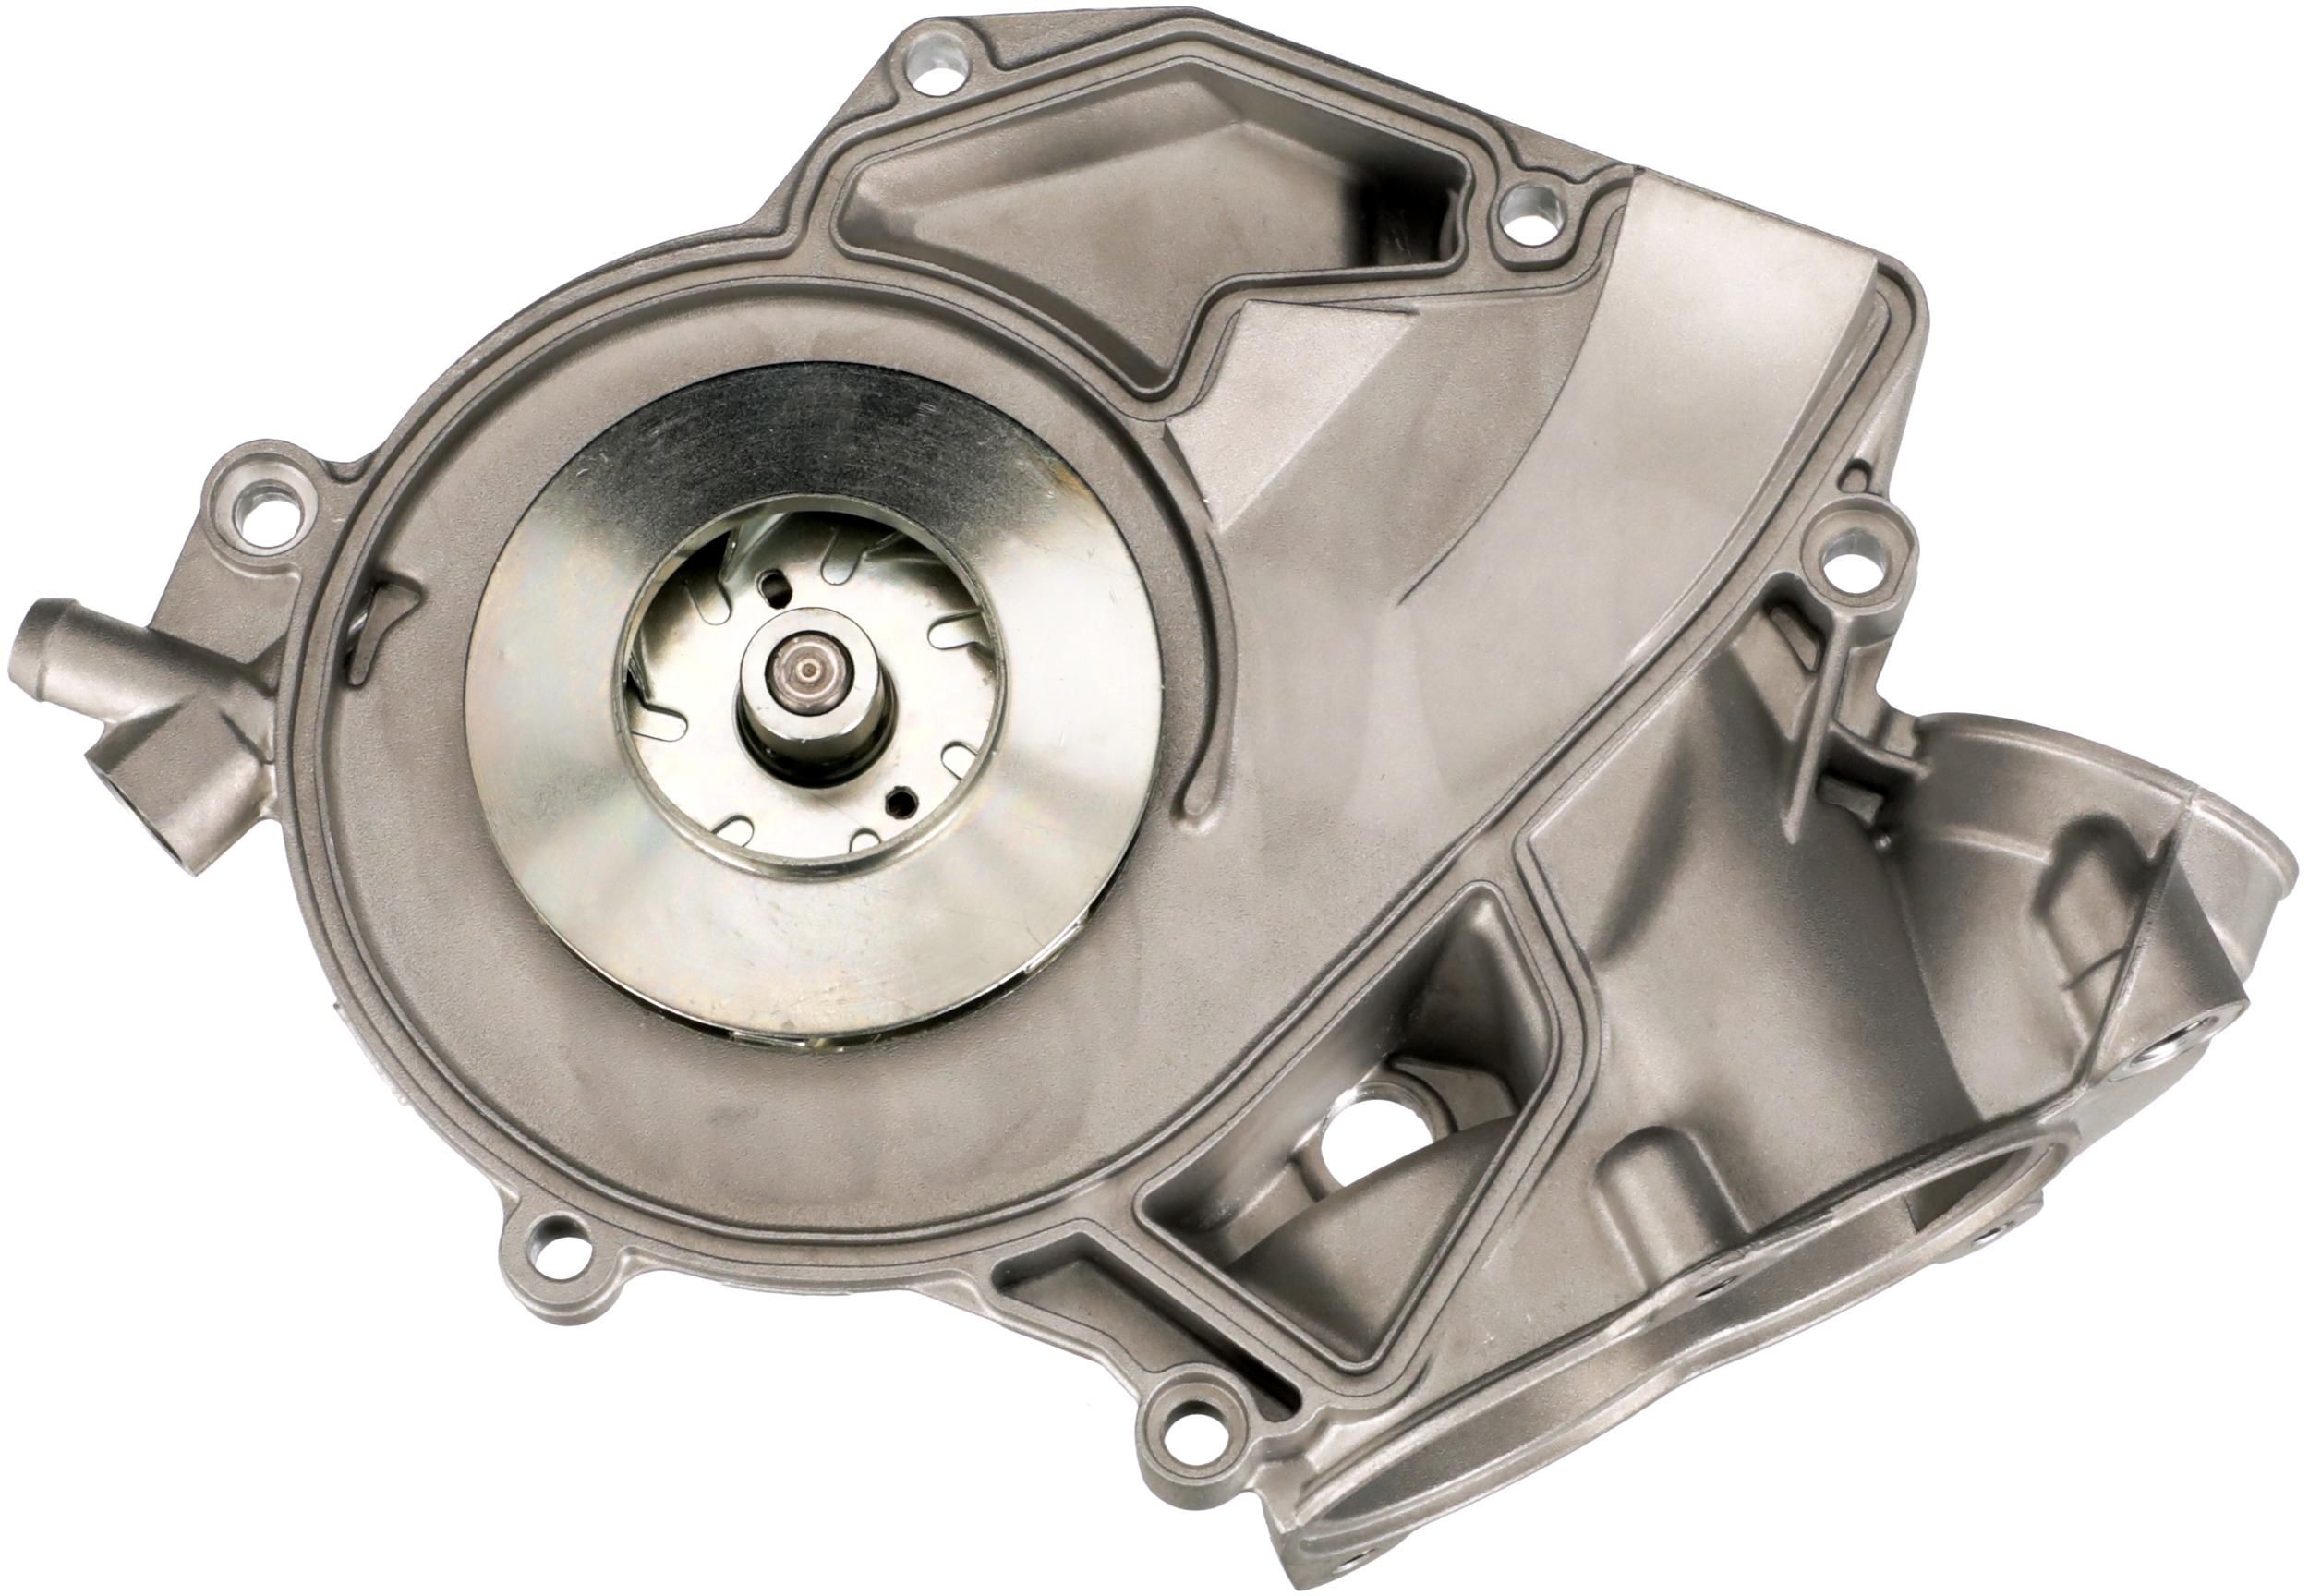 GATES 7702-15065 Water pump Metal, with belt pulley, for v-ribbed belt pulley, with gaskets/seals